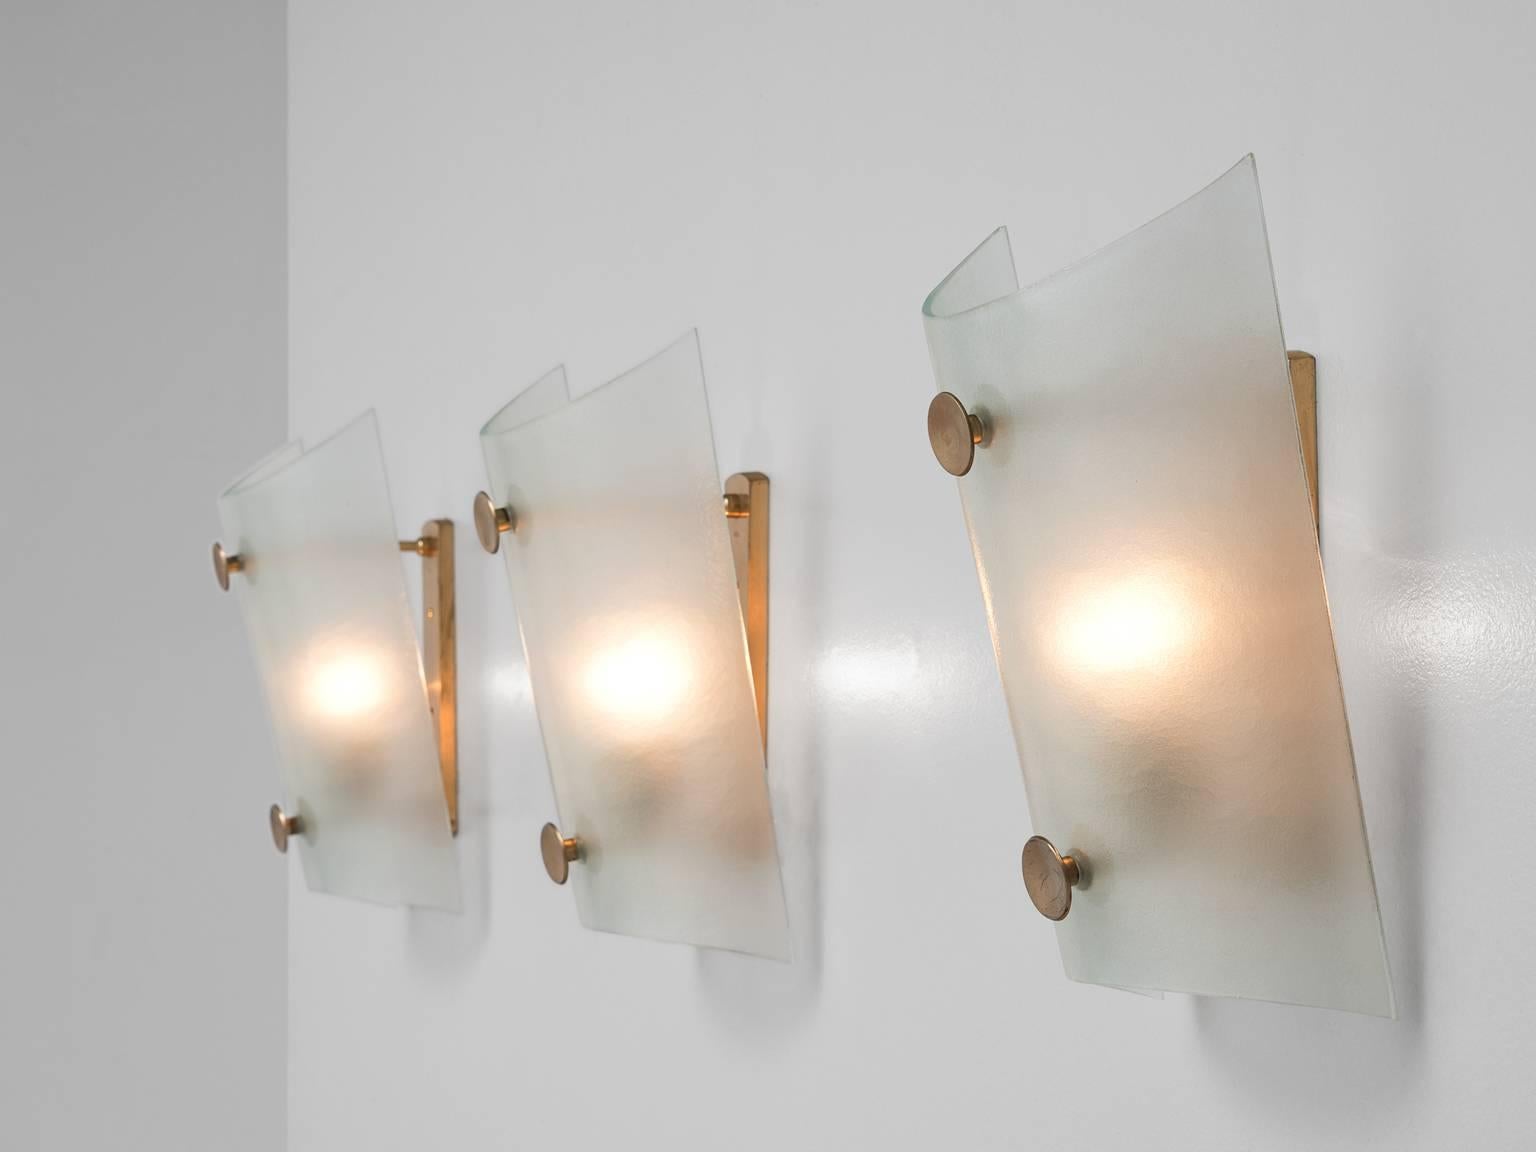 Set of three wall lights, in glass and metal, Italy, 1970s. 

Set of three interesting wall lights with a round glass shade and brass colored details. The glass has a nice structured surface with a semi-transparent look, which gives these sconces an